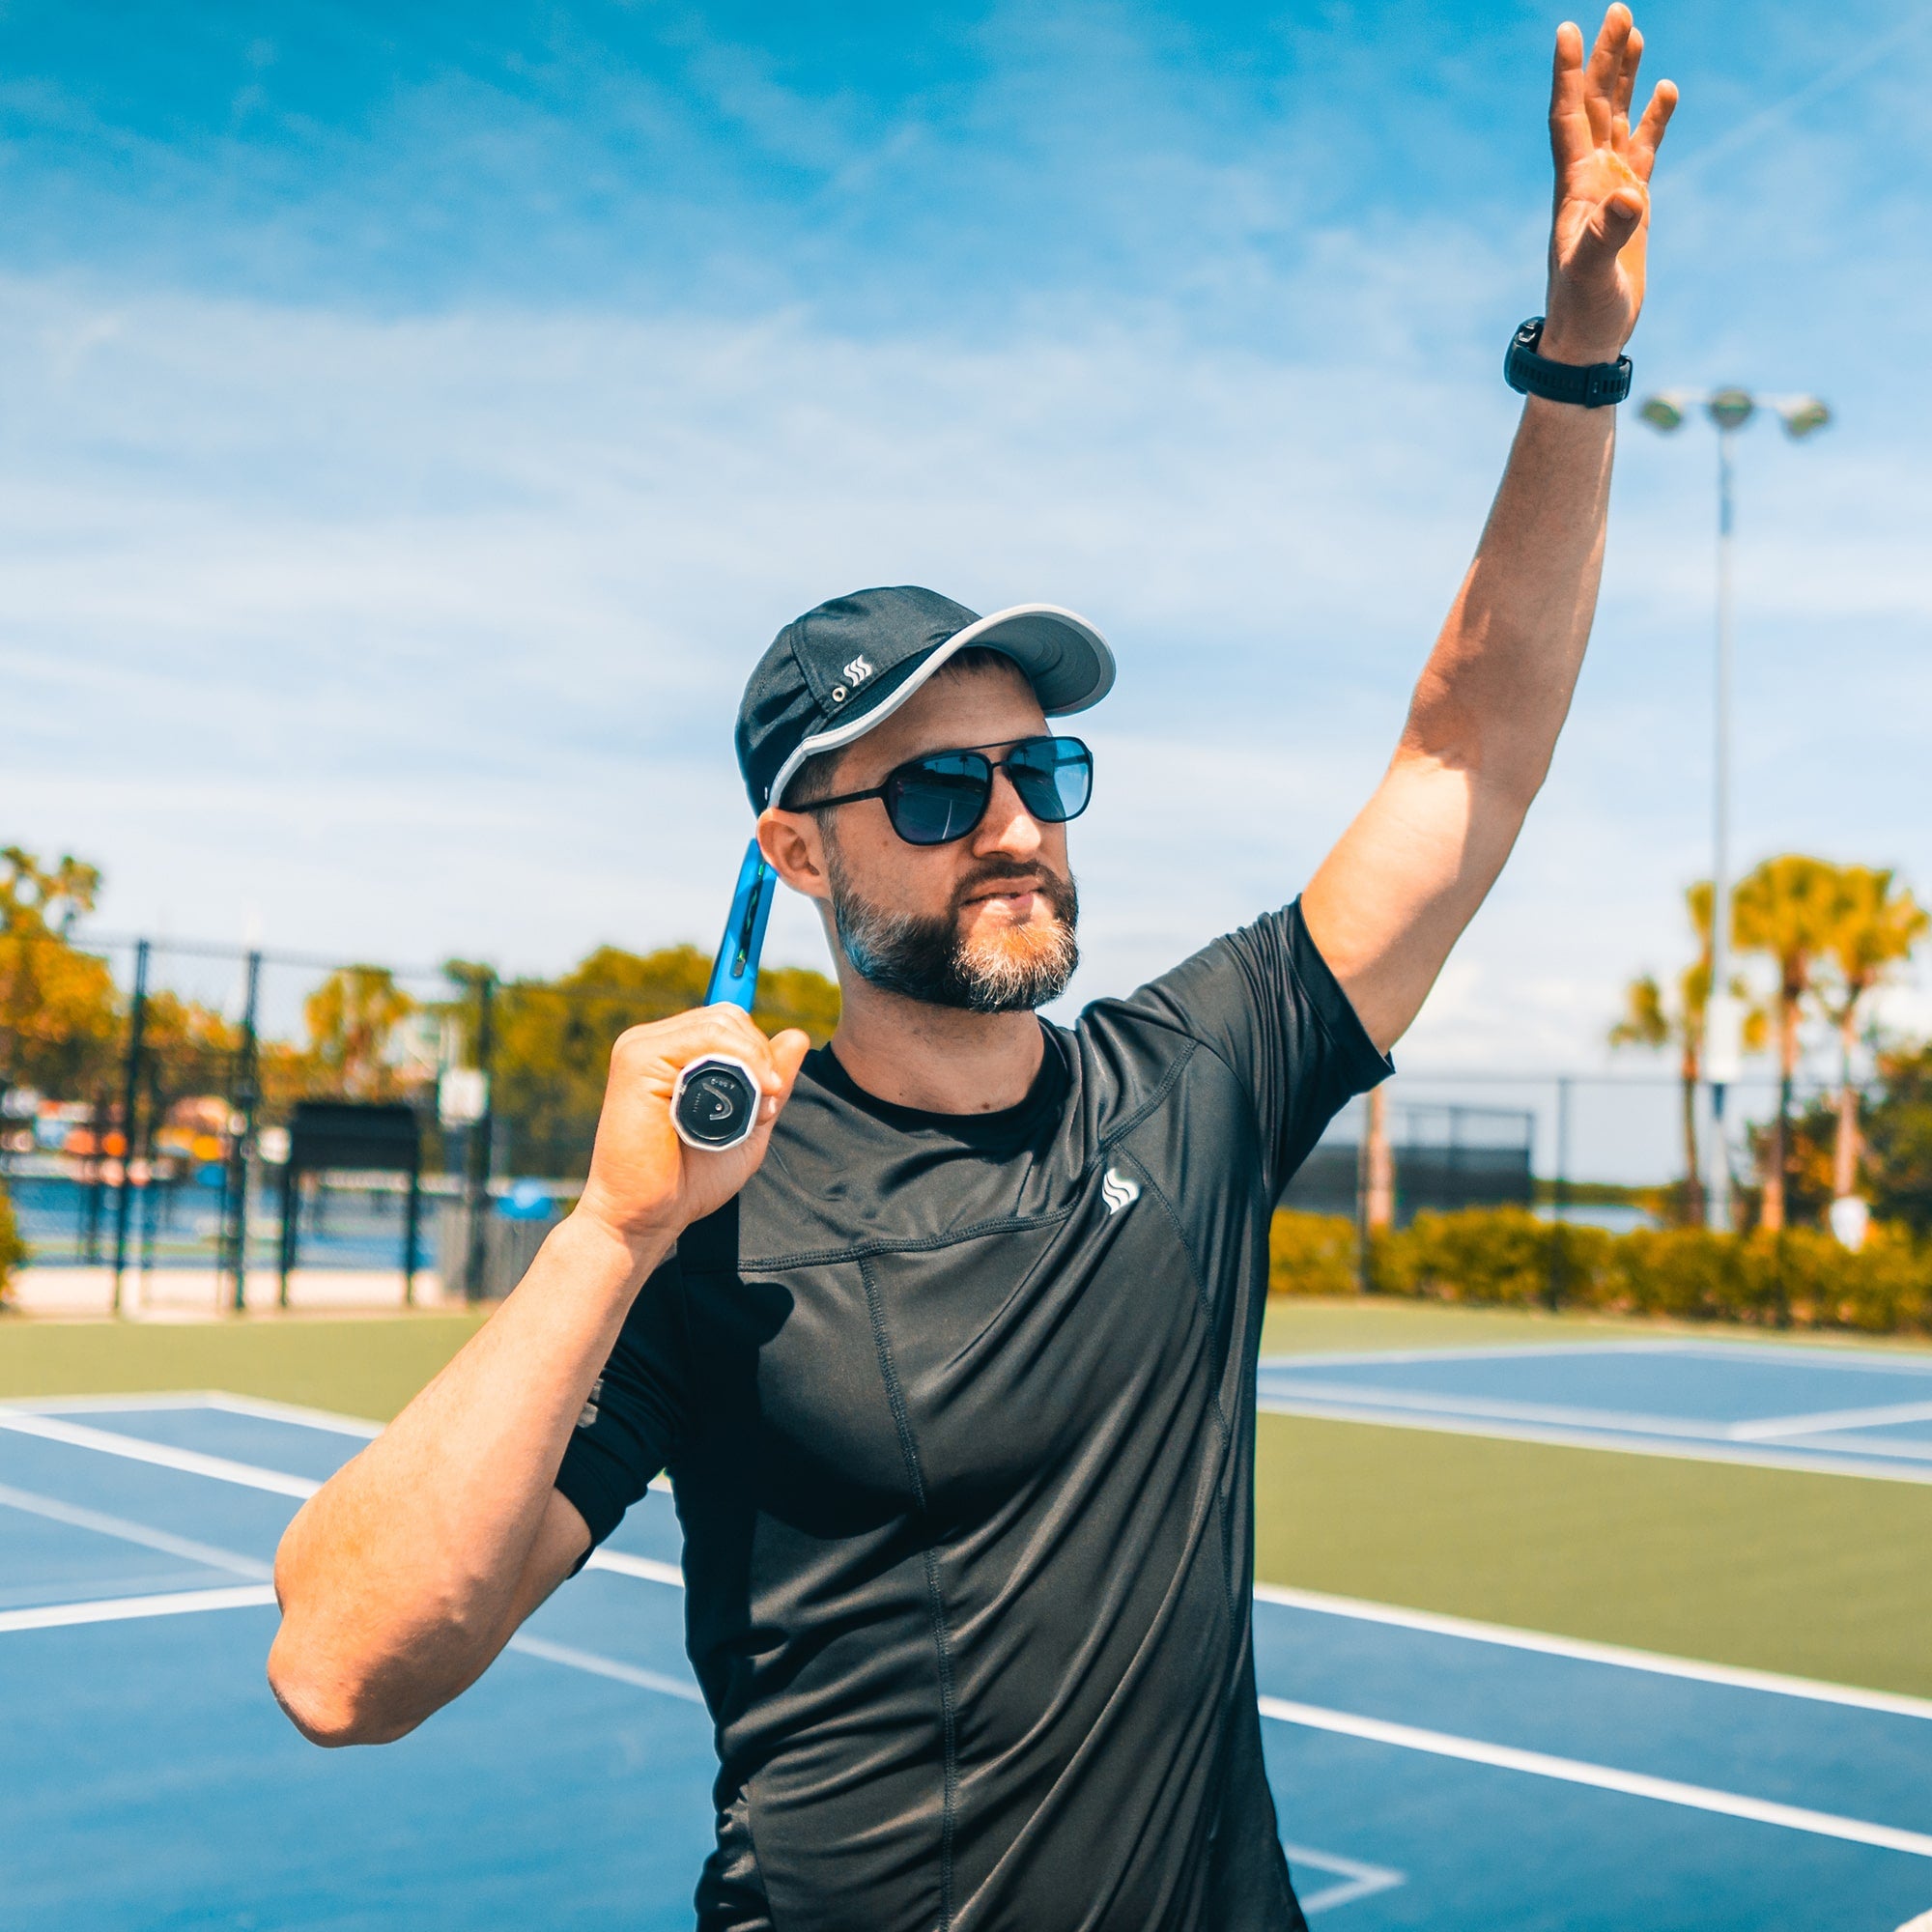 Man playing tennis in a black dry fit hat